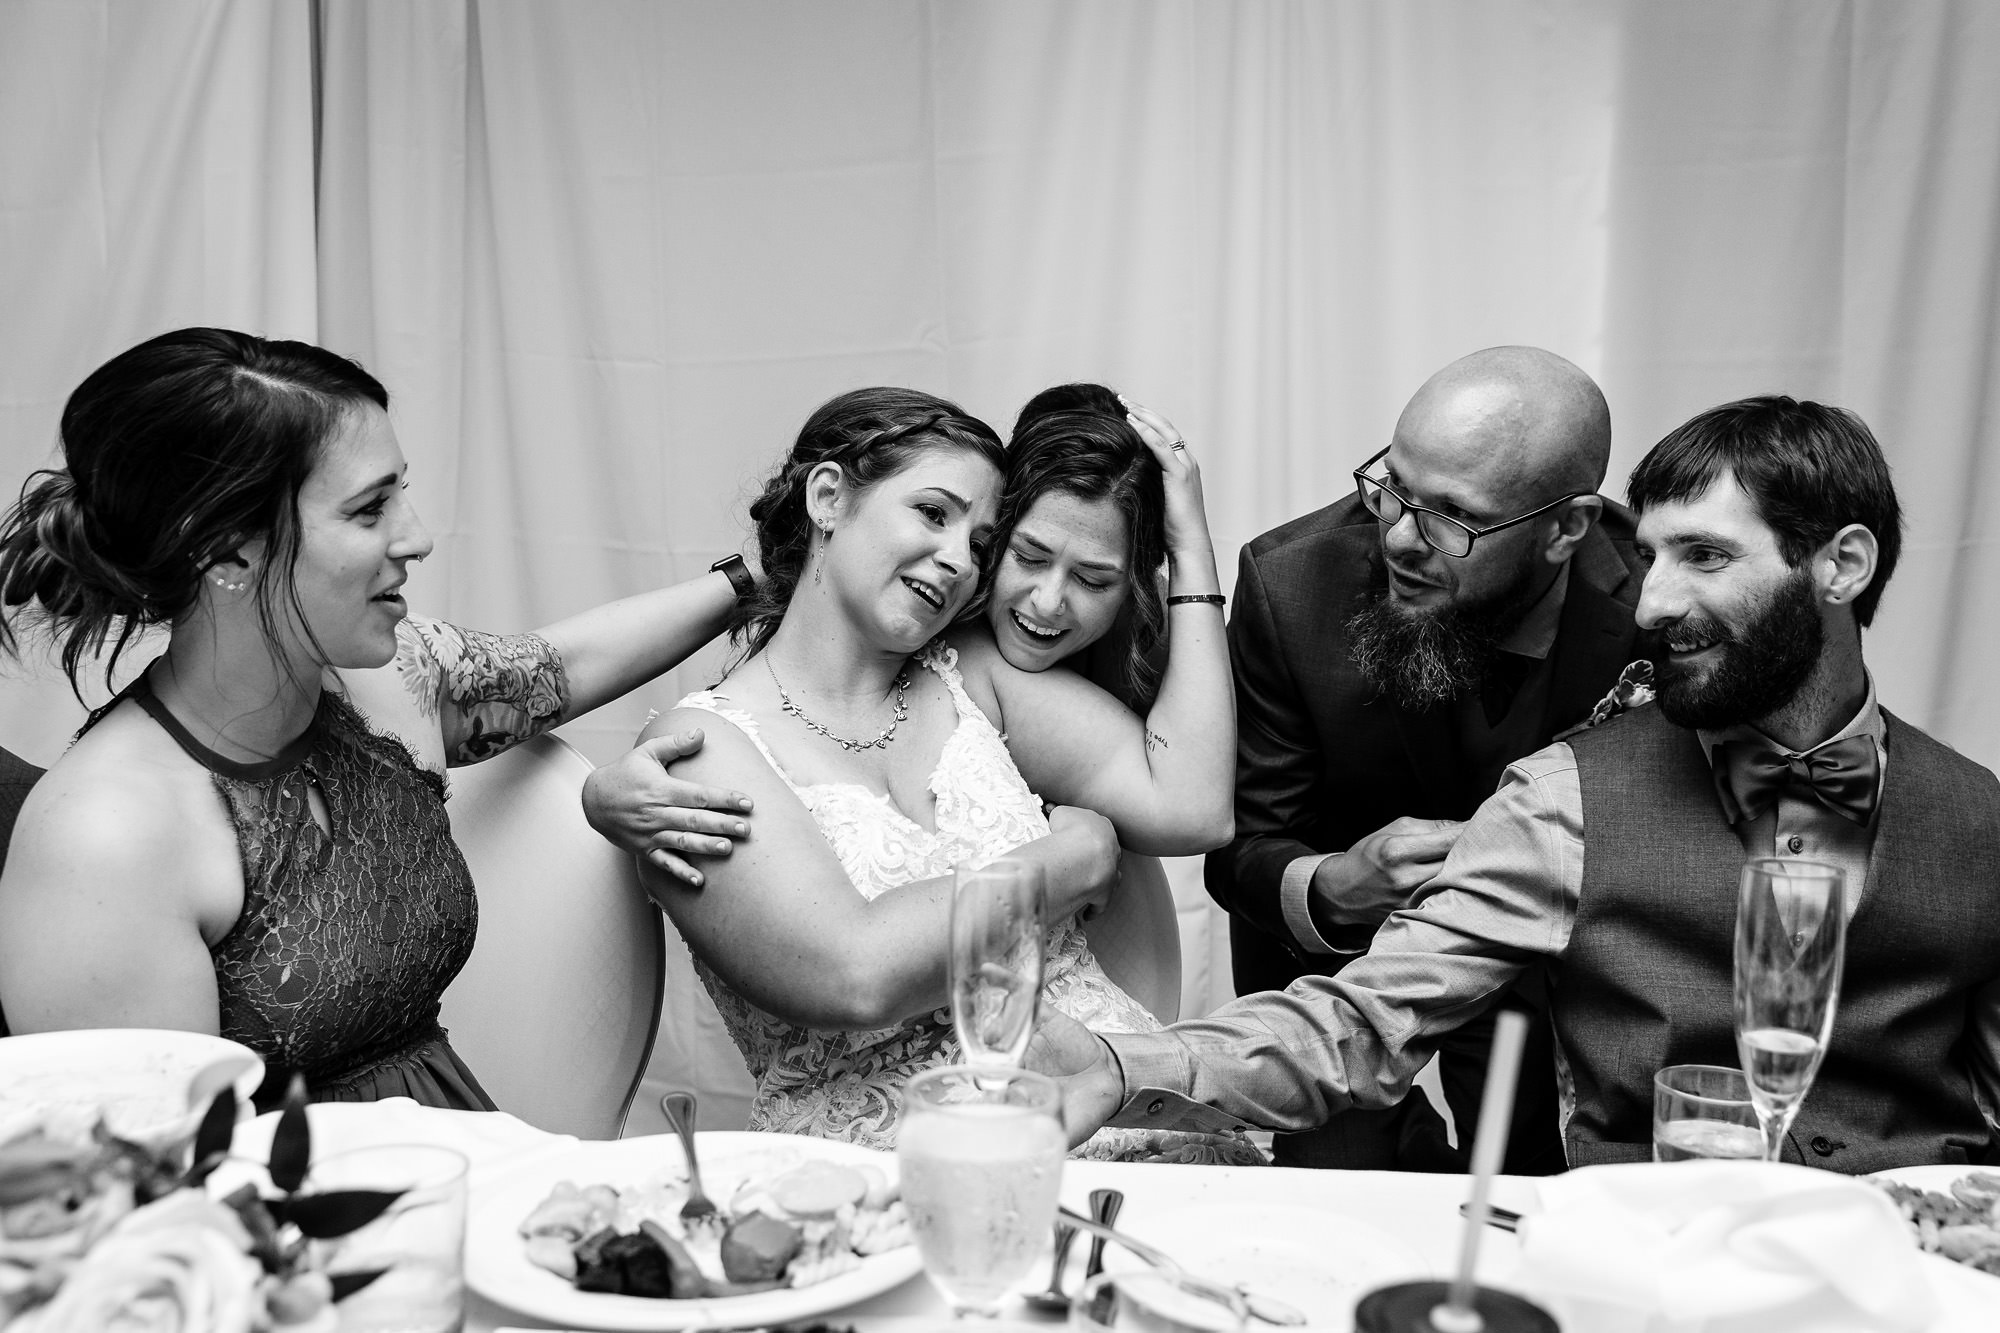 A moment during toasts that the wedding couple shared with their closest friends.